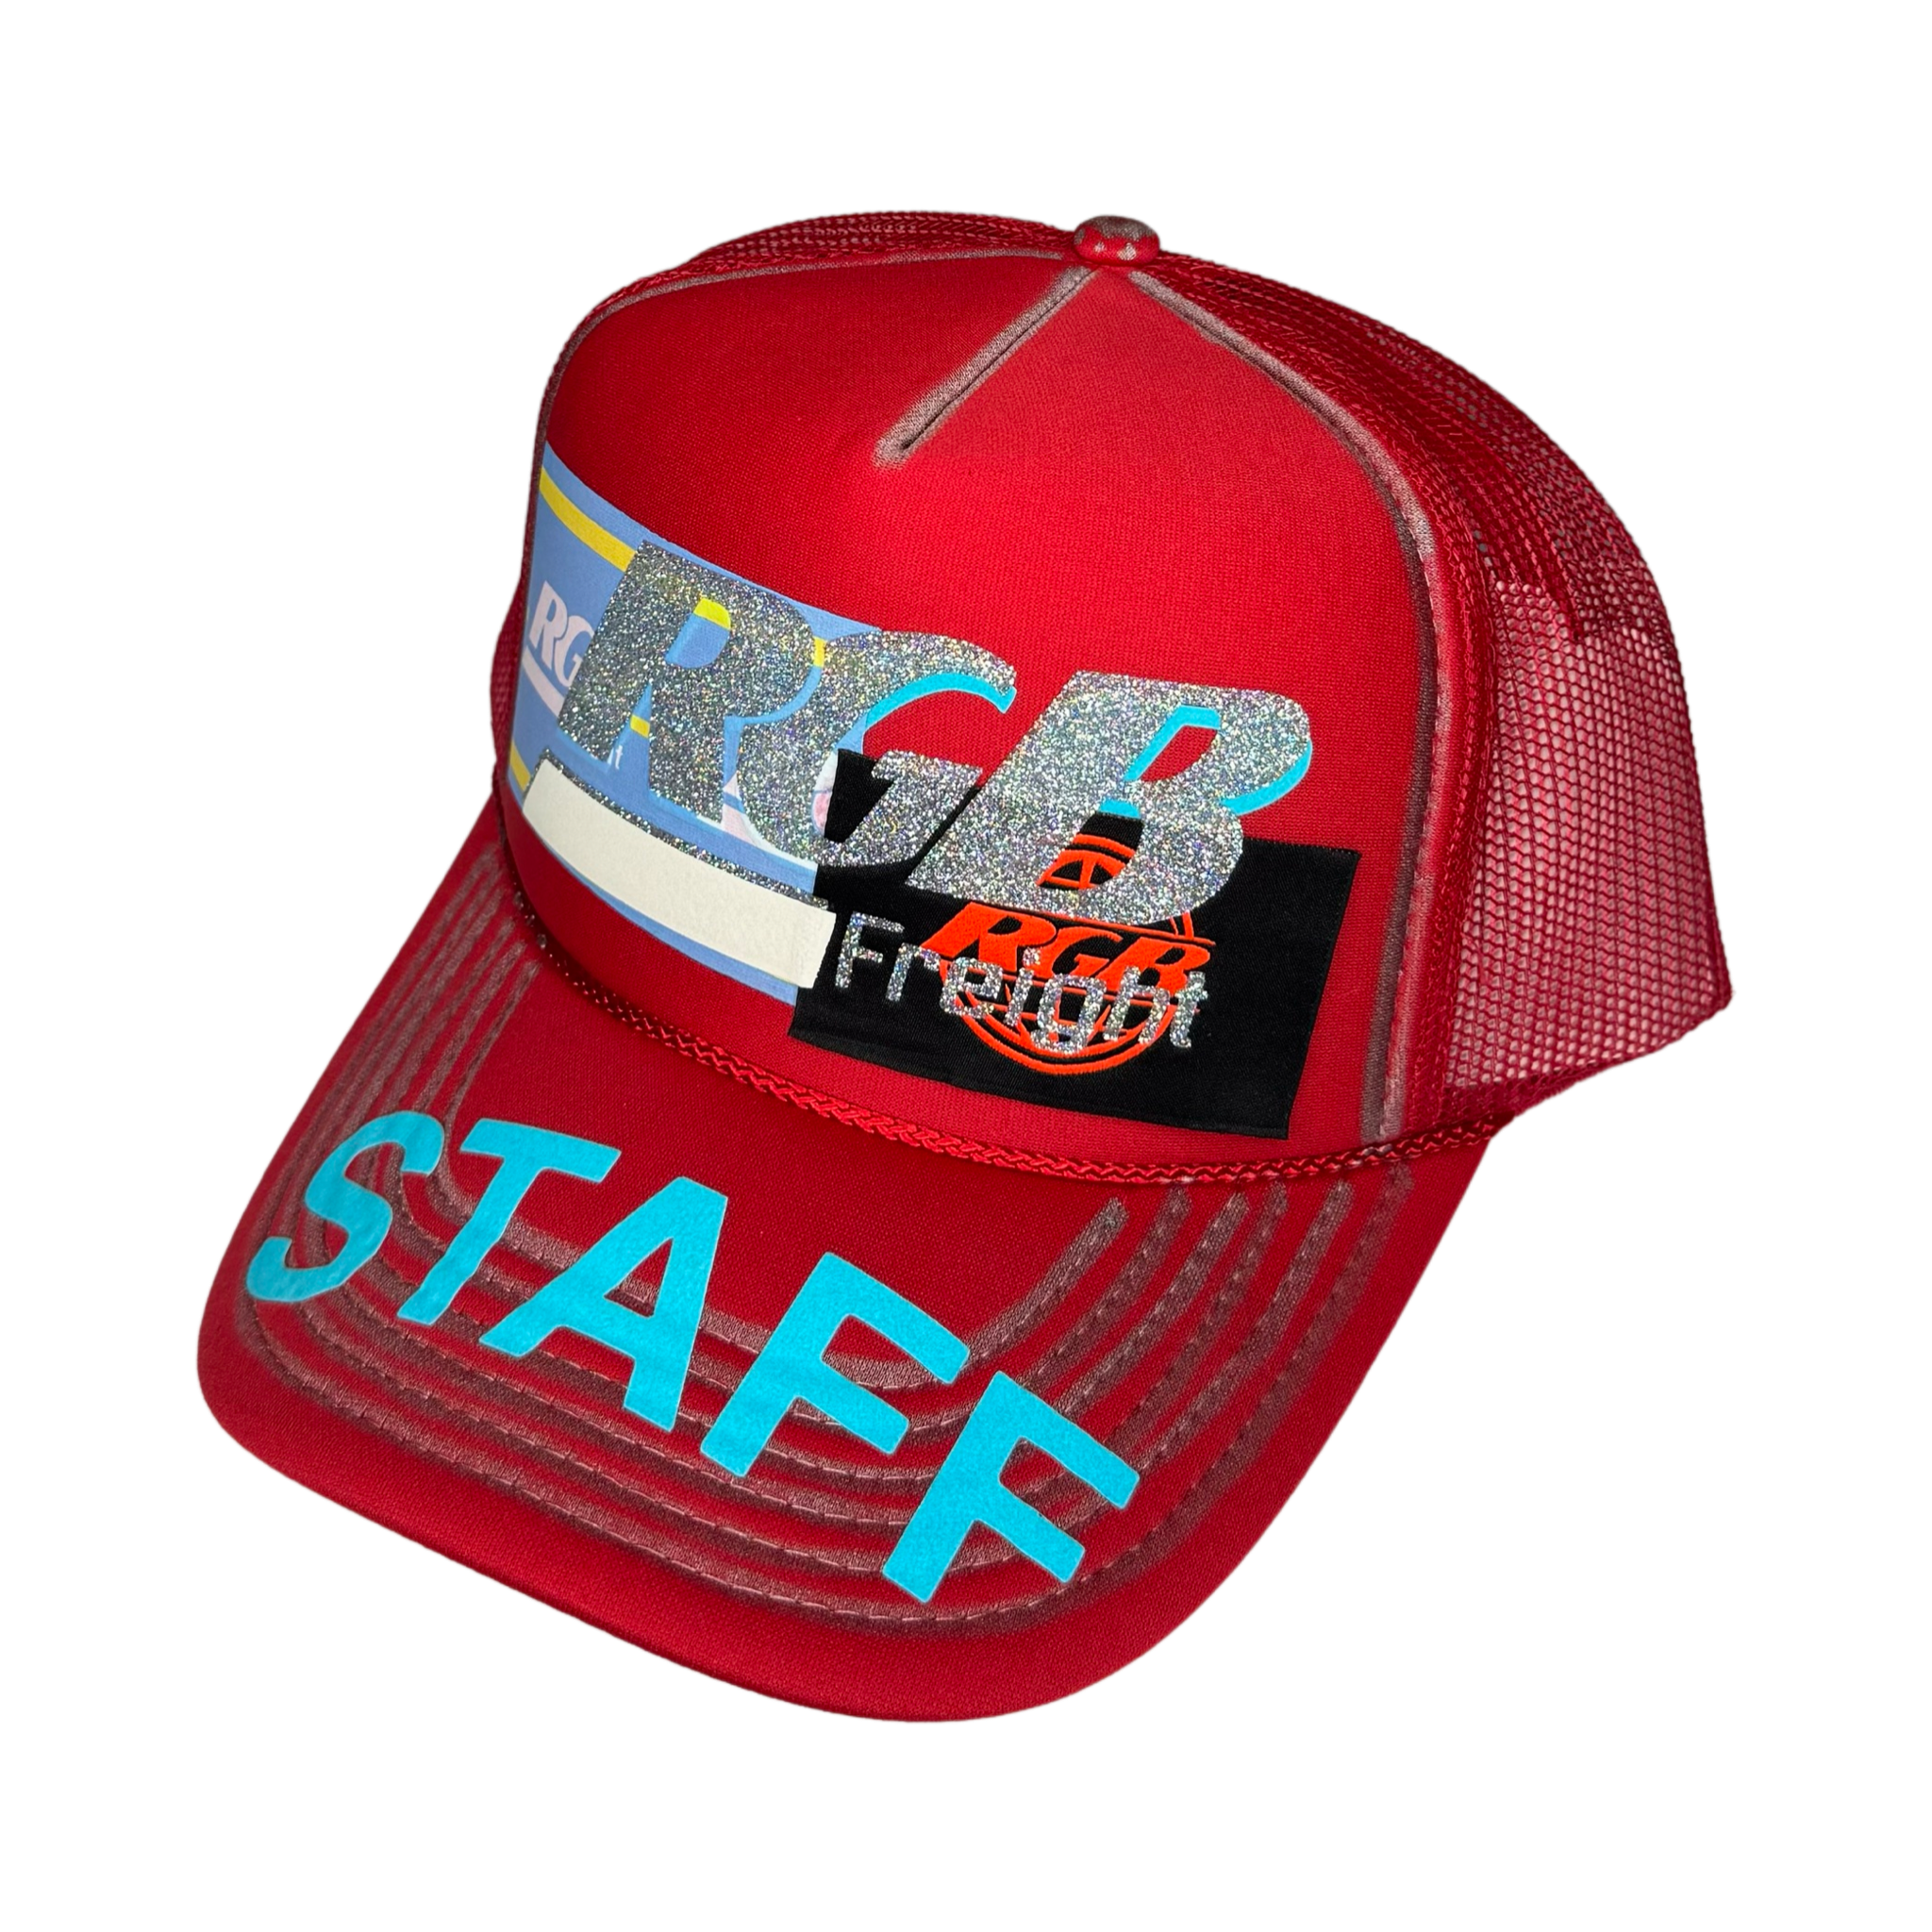 RGB FREIGHT TRUCKER HAT - WTF REFLECTIVE 1 of 1